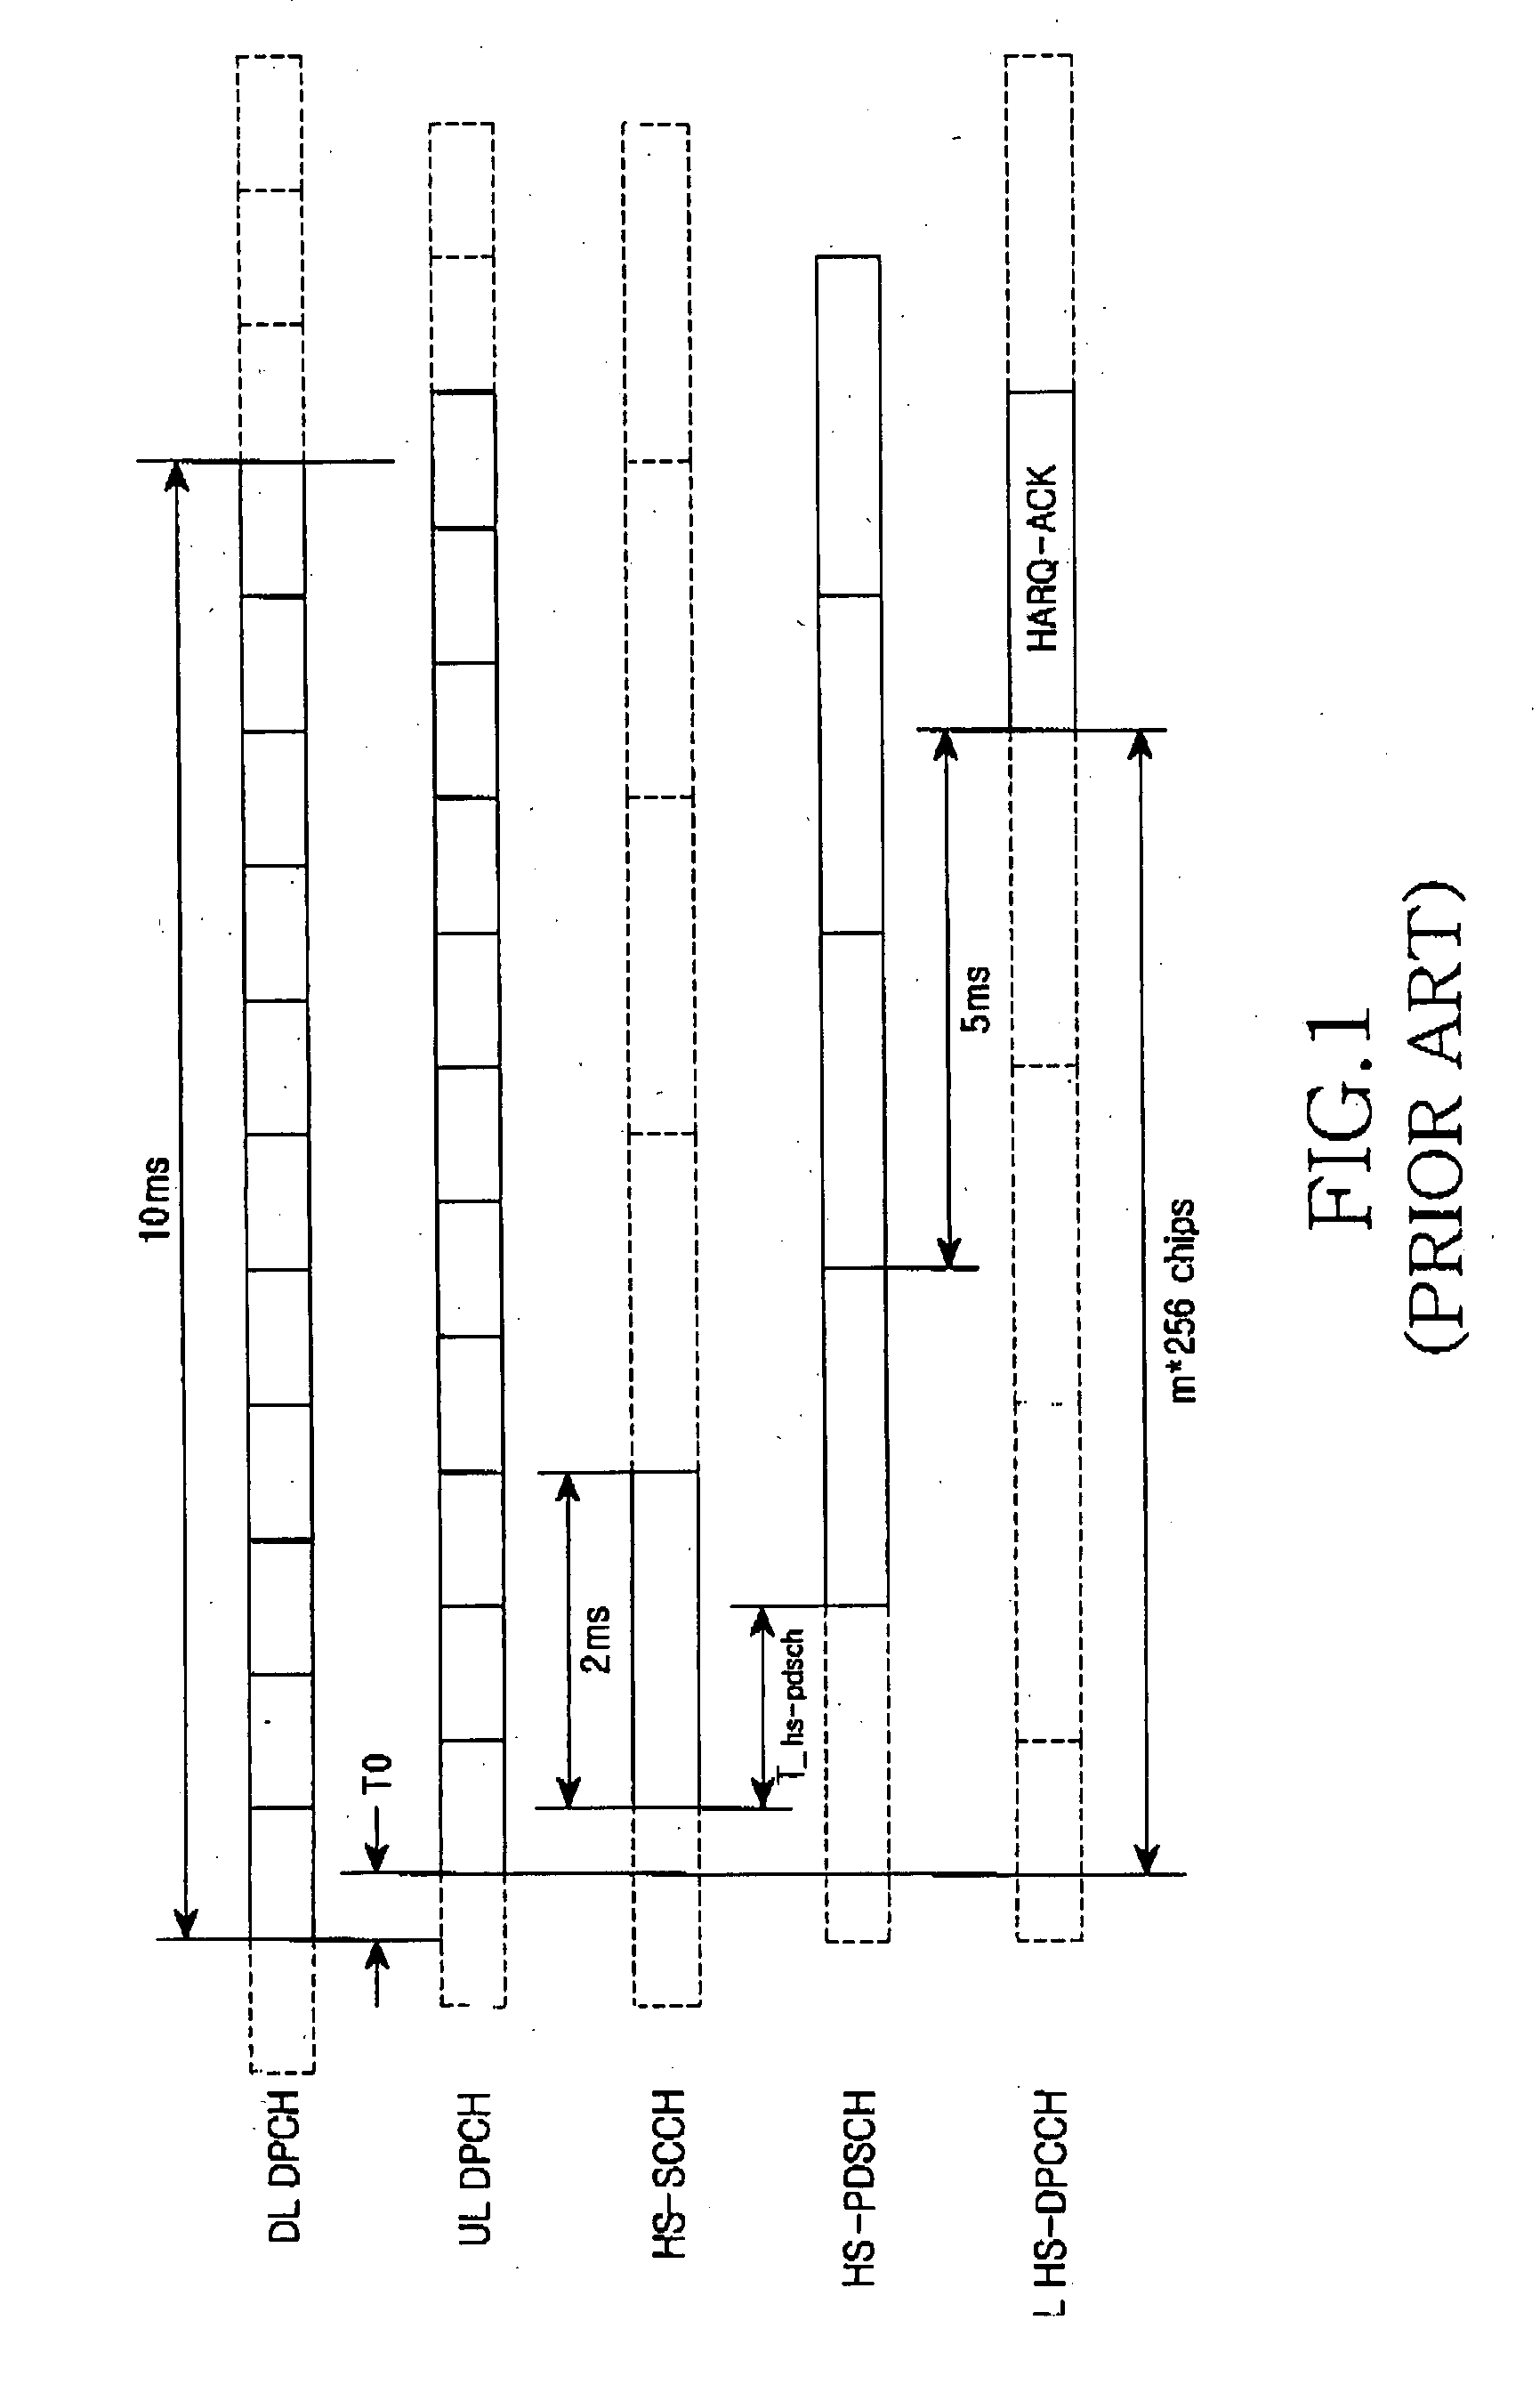 Method and system for allocating resources in a communication system